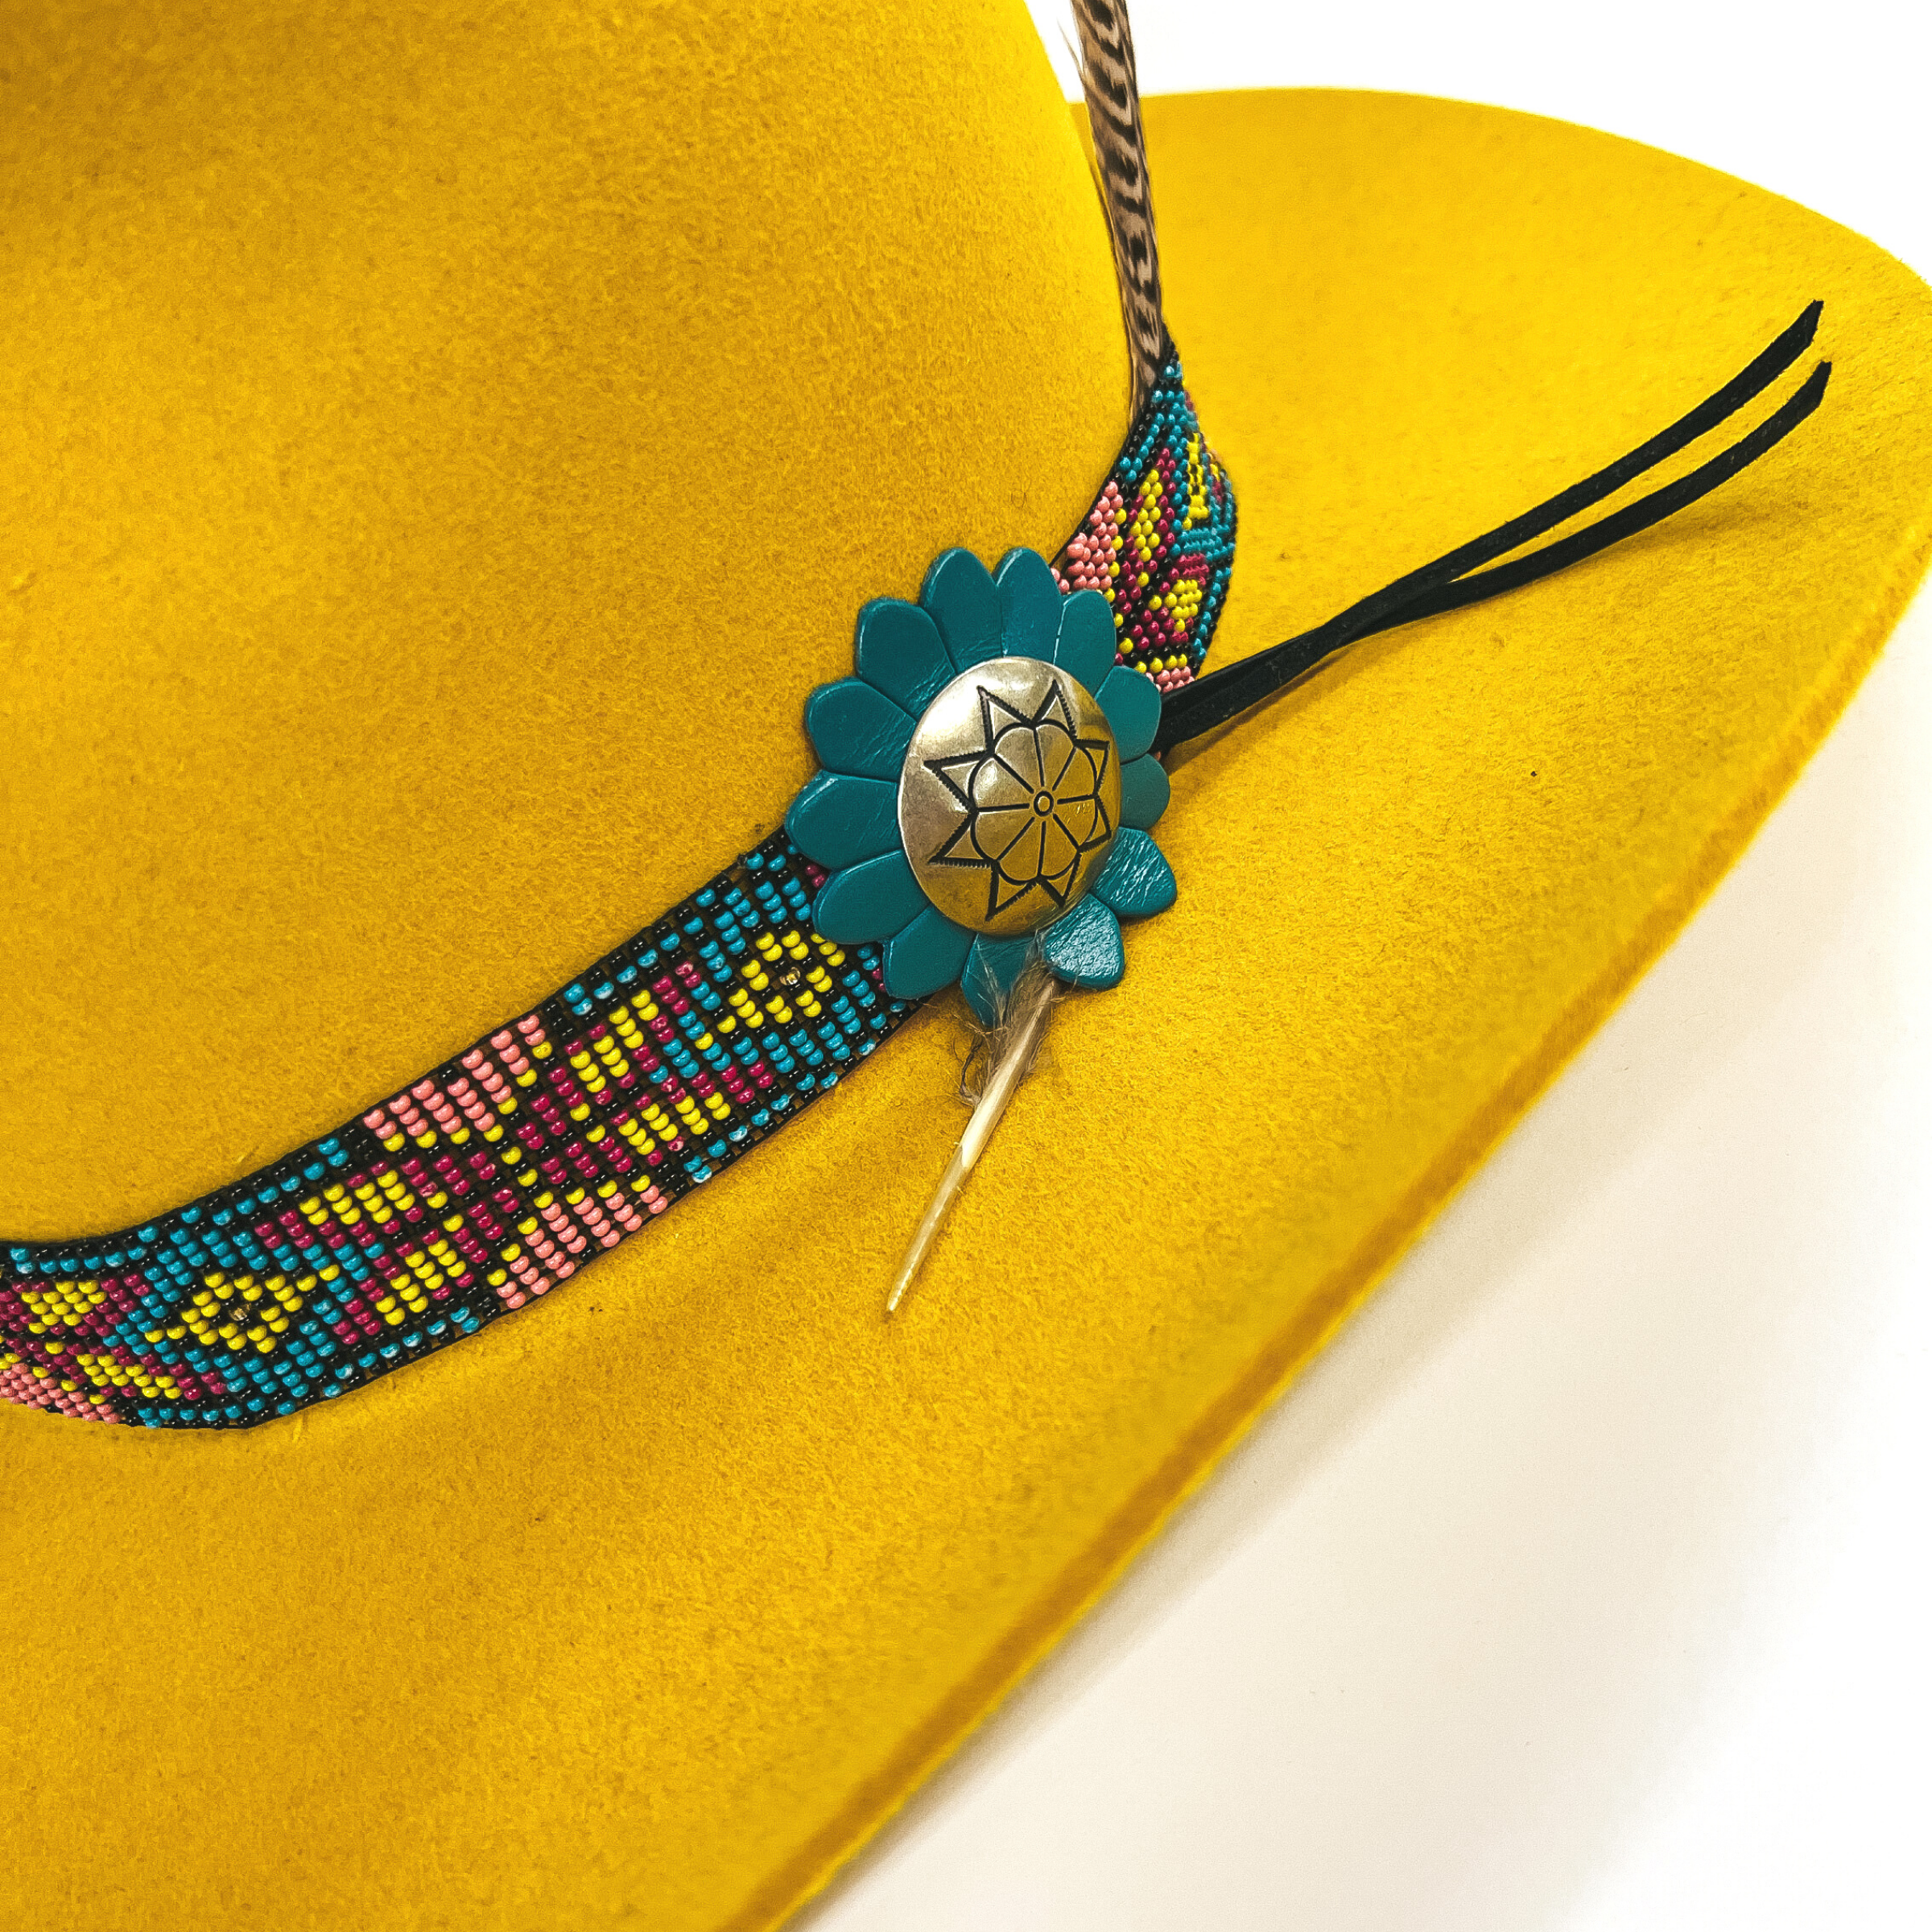 Charlie 1 Horse | Gold Digger Wool Felt Hat with Beaded Band and Silver Concho in Yellow - Giddy Up Glamour Boutique